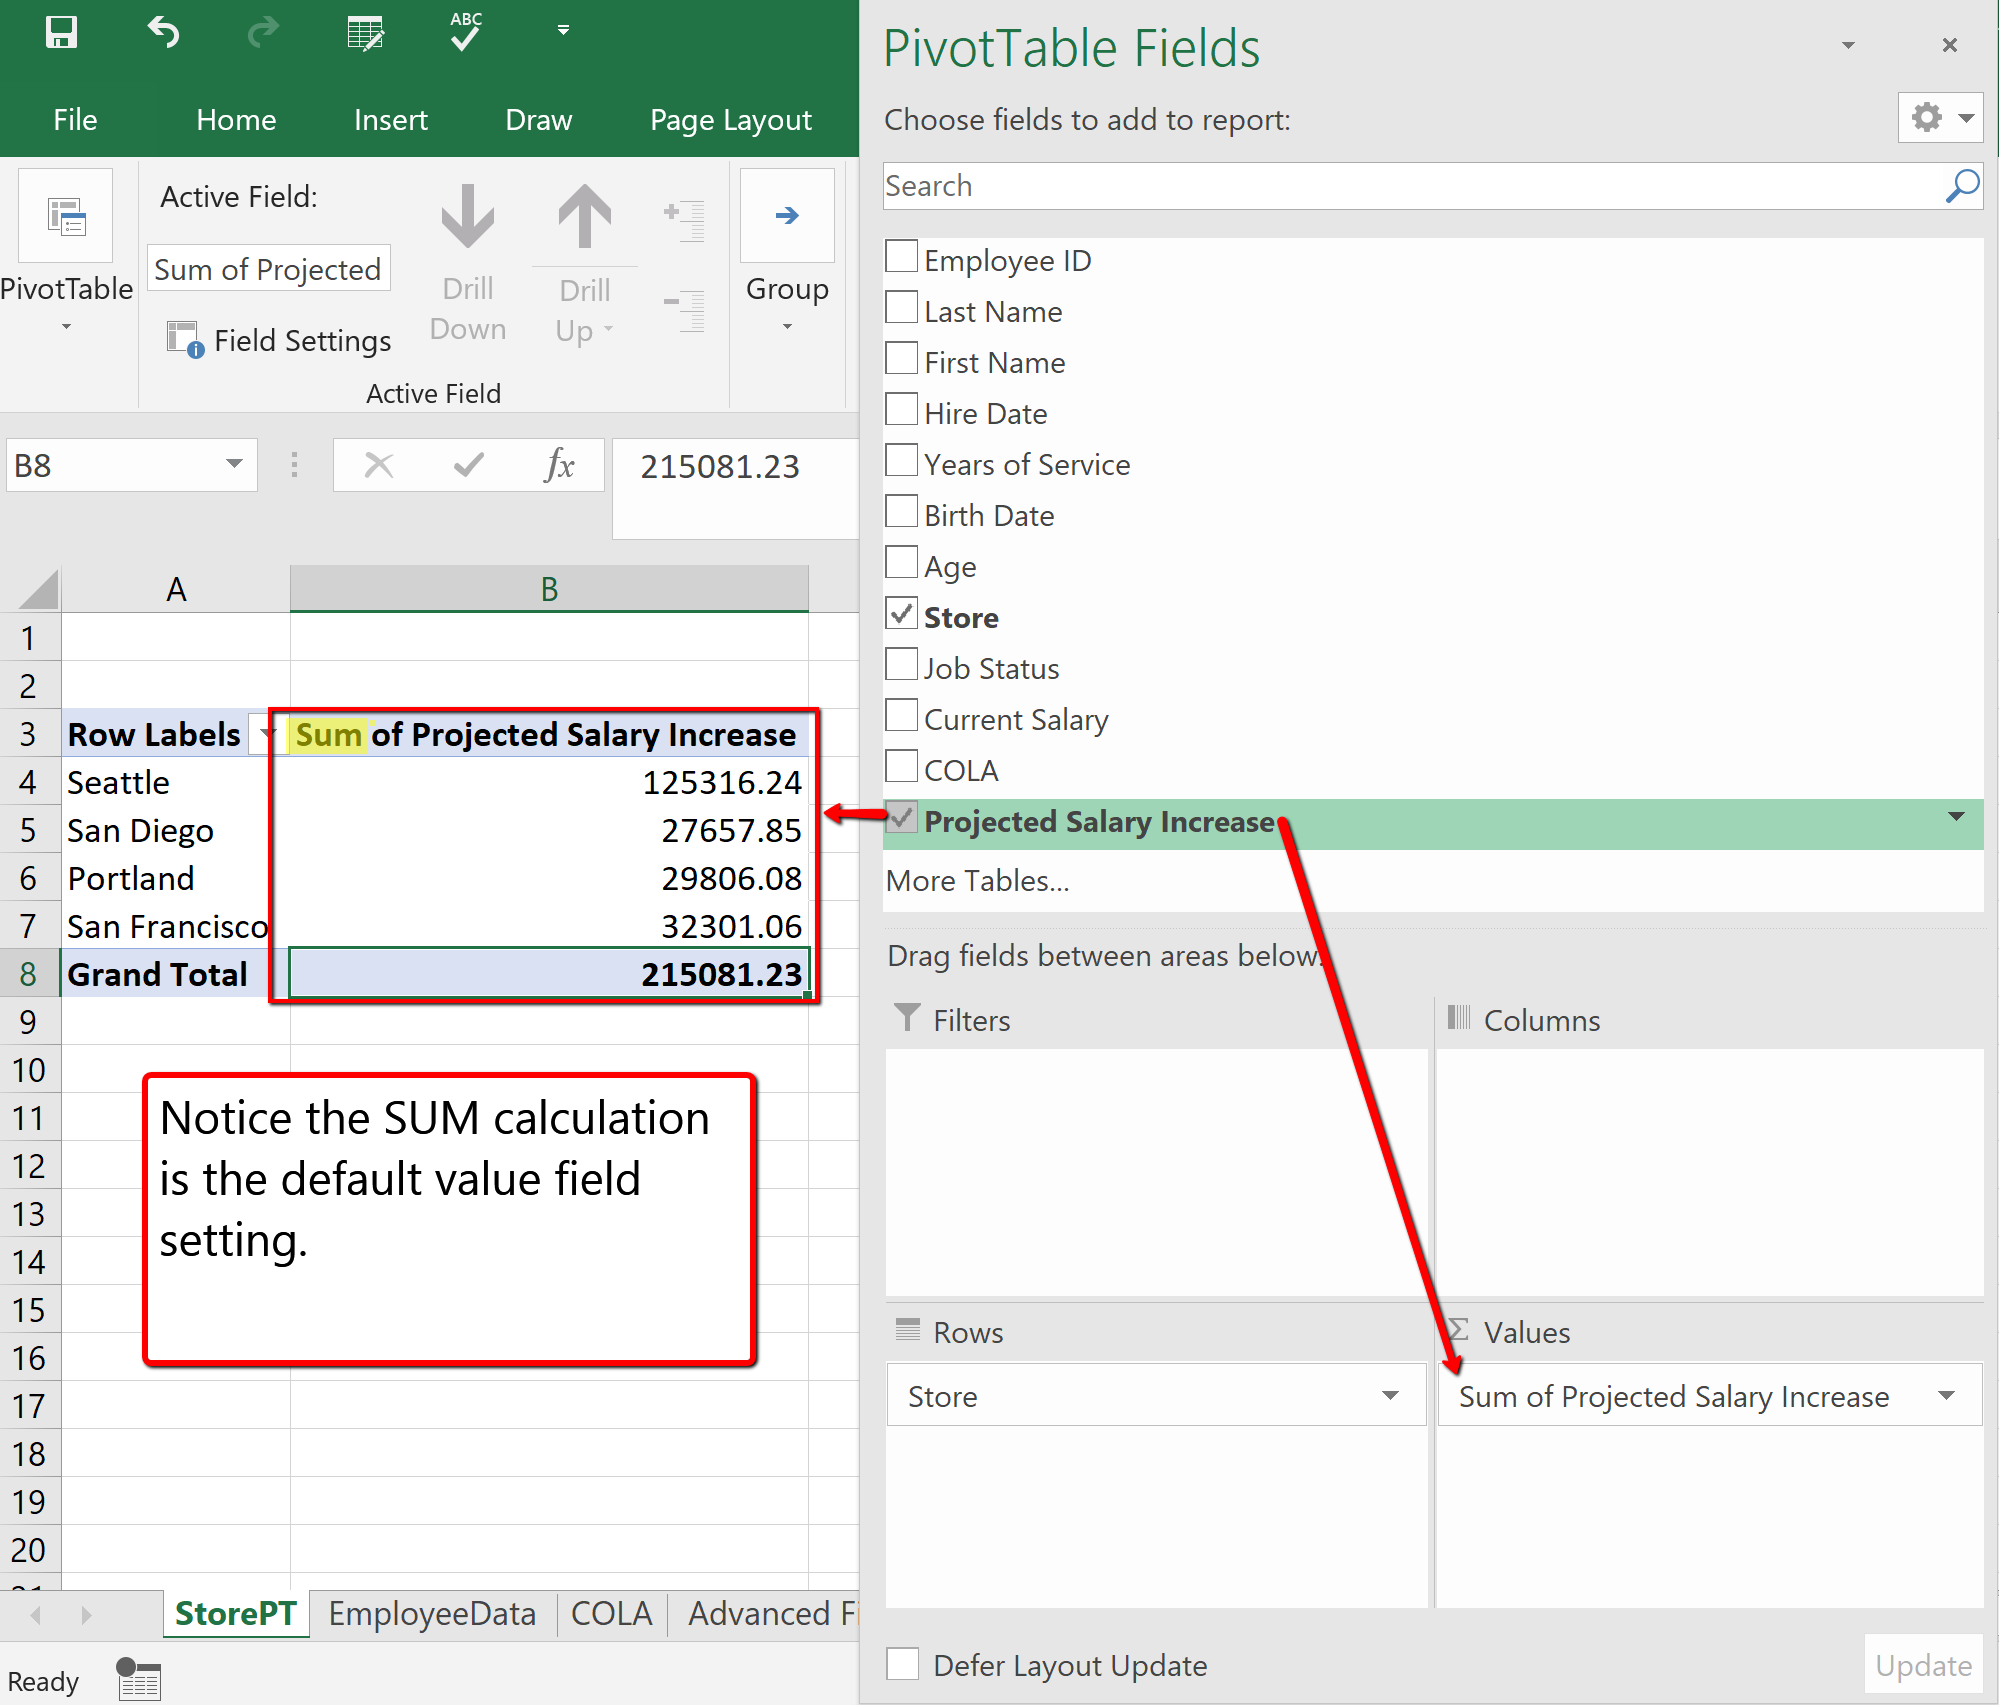 Screenshot of the PivotTable Value selection